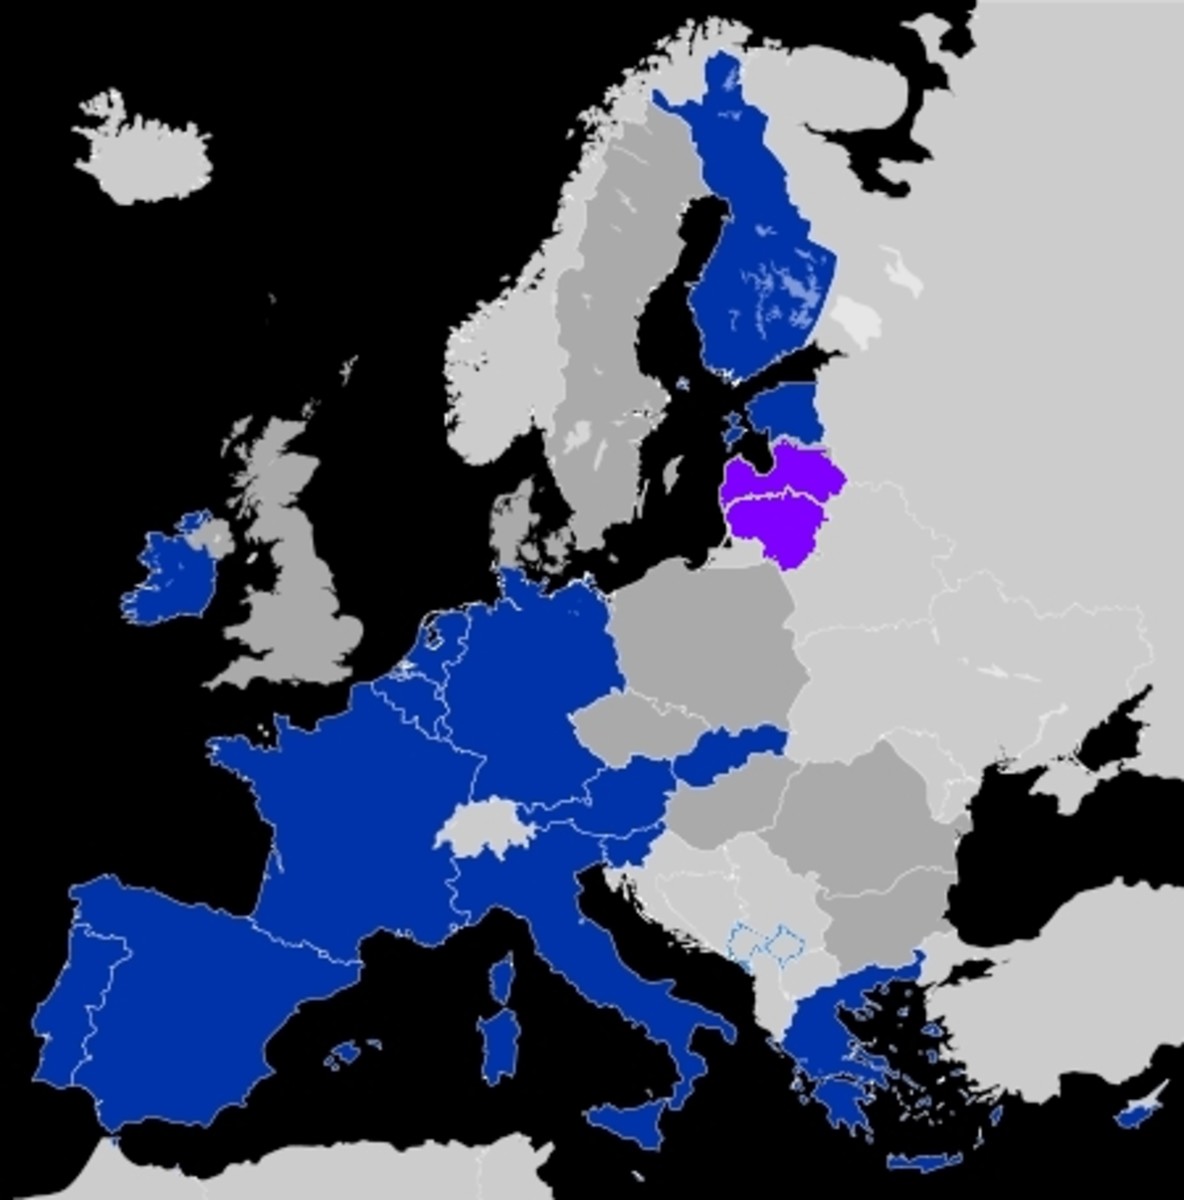 The 19 Eurozone countries (whose currency is the Euro) in dark blue and purple (Latvia and Lithuania joined in 2014 and 2015 respectively are purple).